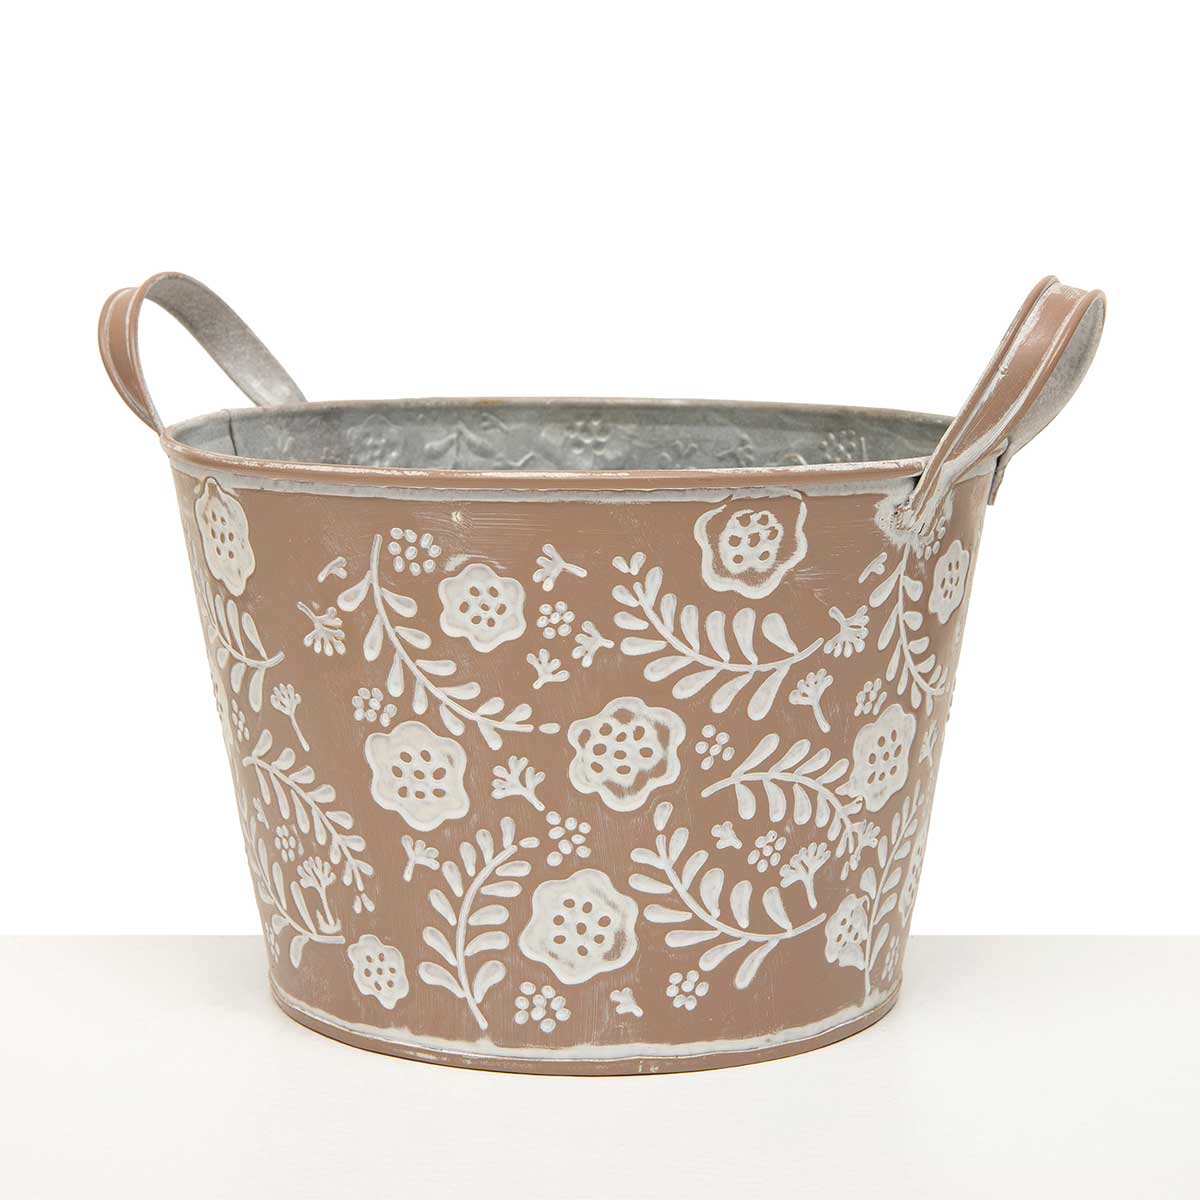 BUCKET FLOWER SHORT 7.5IN X 5IN TAUPE/WHITE METAL WITH HANDLES